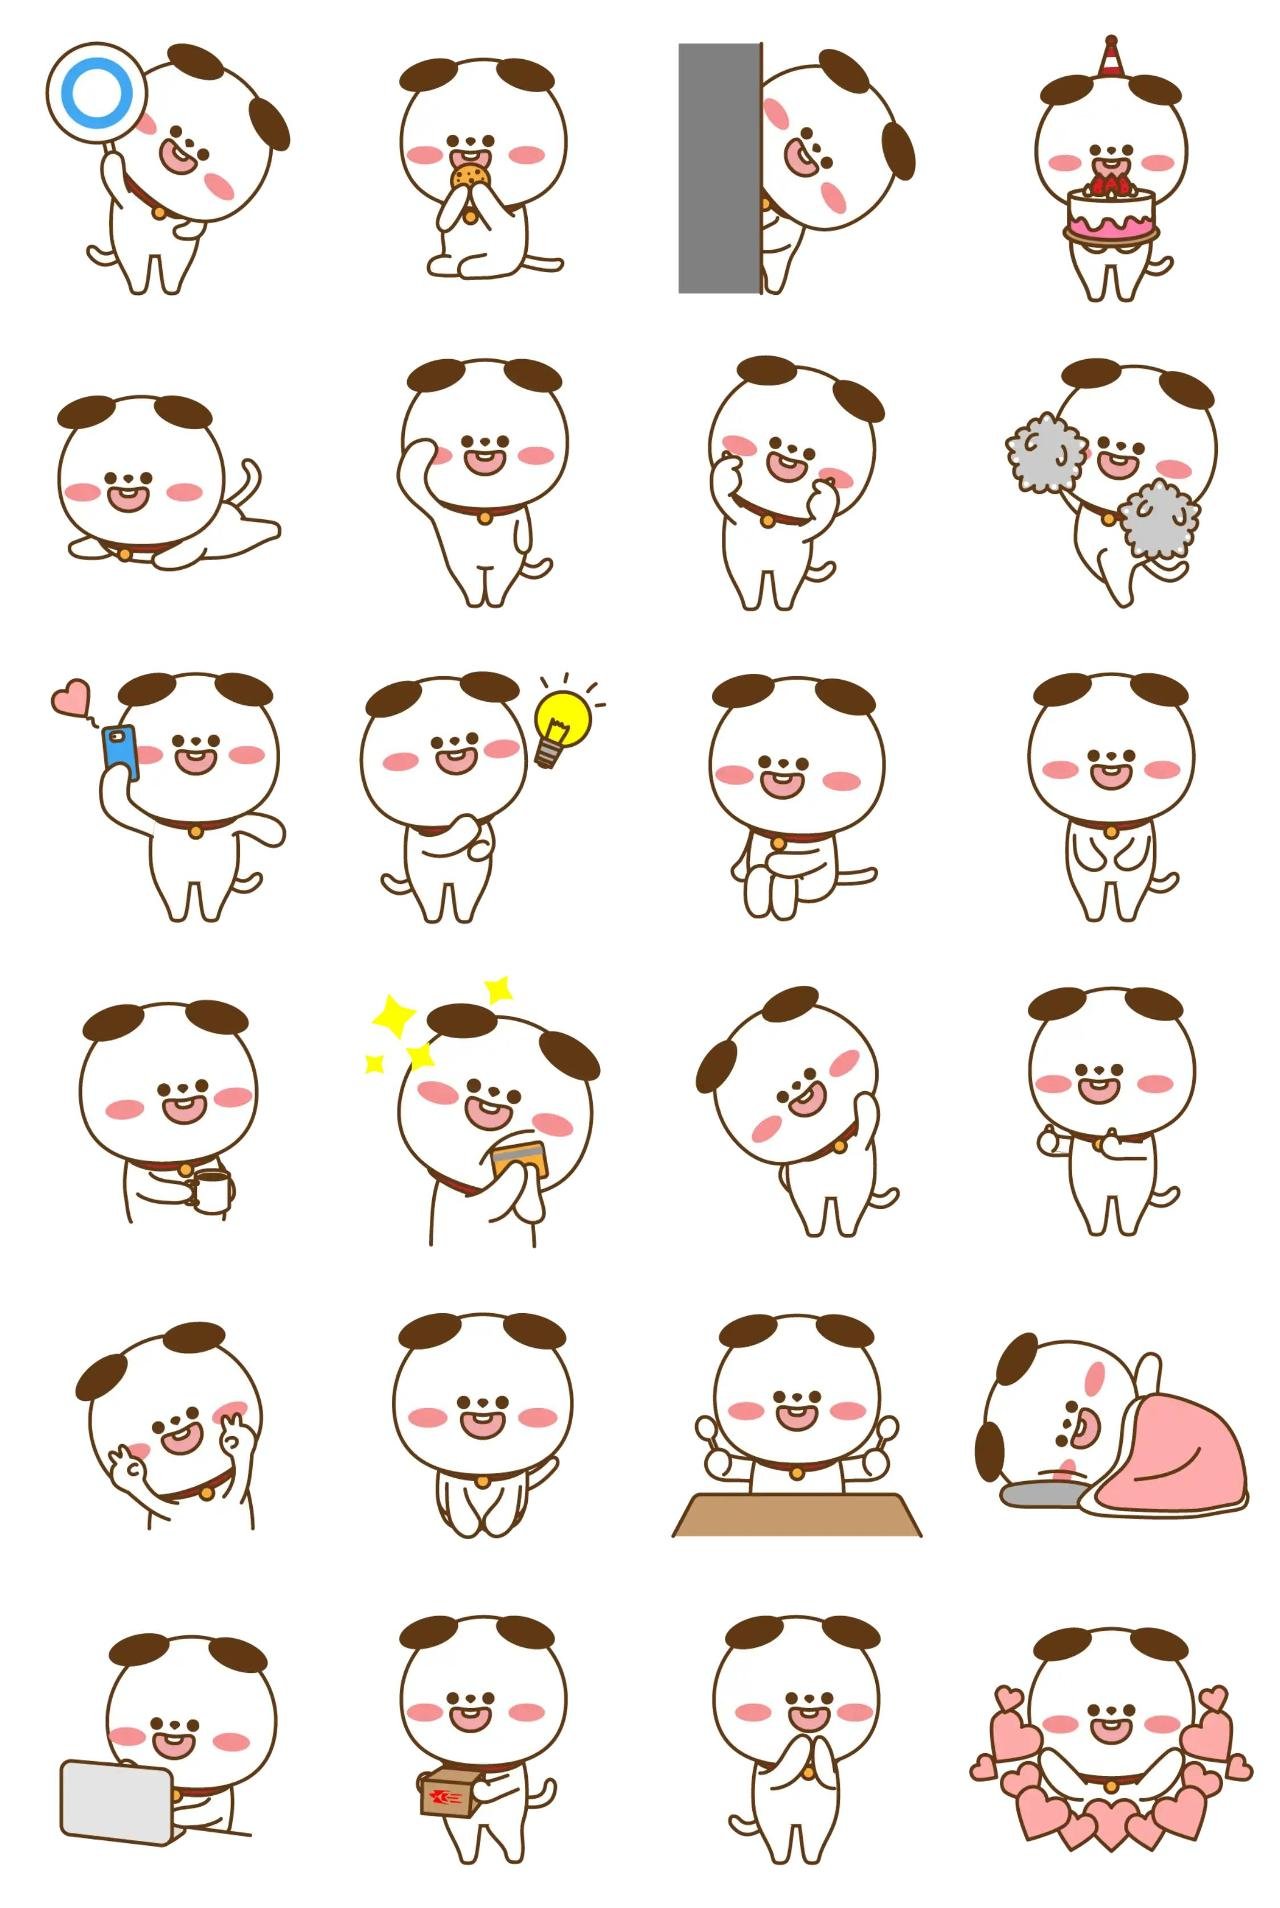 Always Happy Dog 1 Animals sticker pack for Whatsapp, Telegram, Signal, and others chatting and message apps